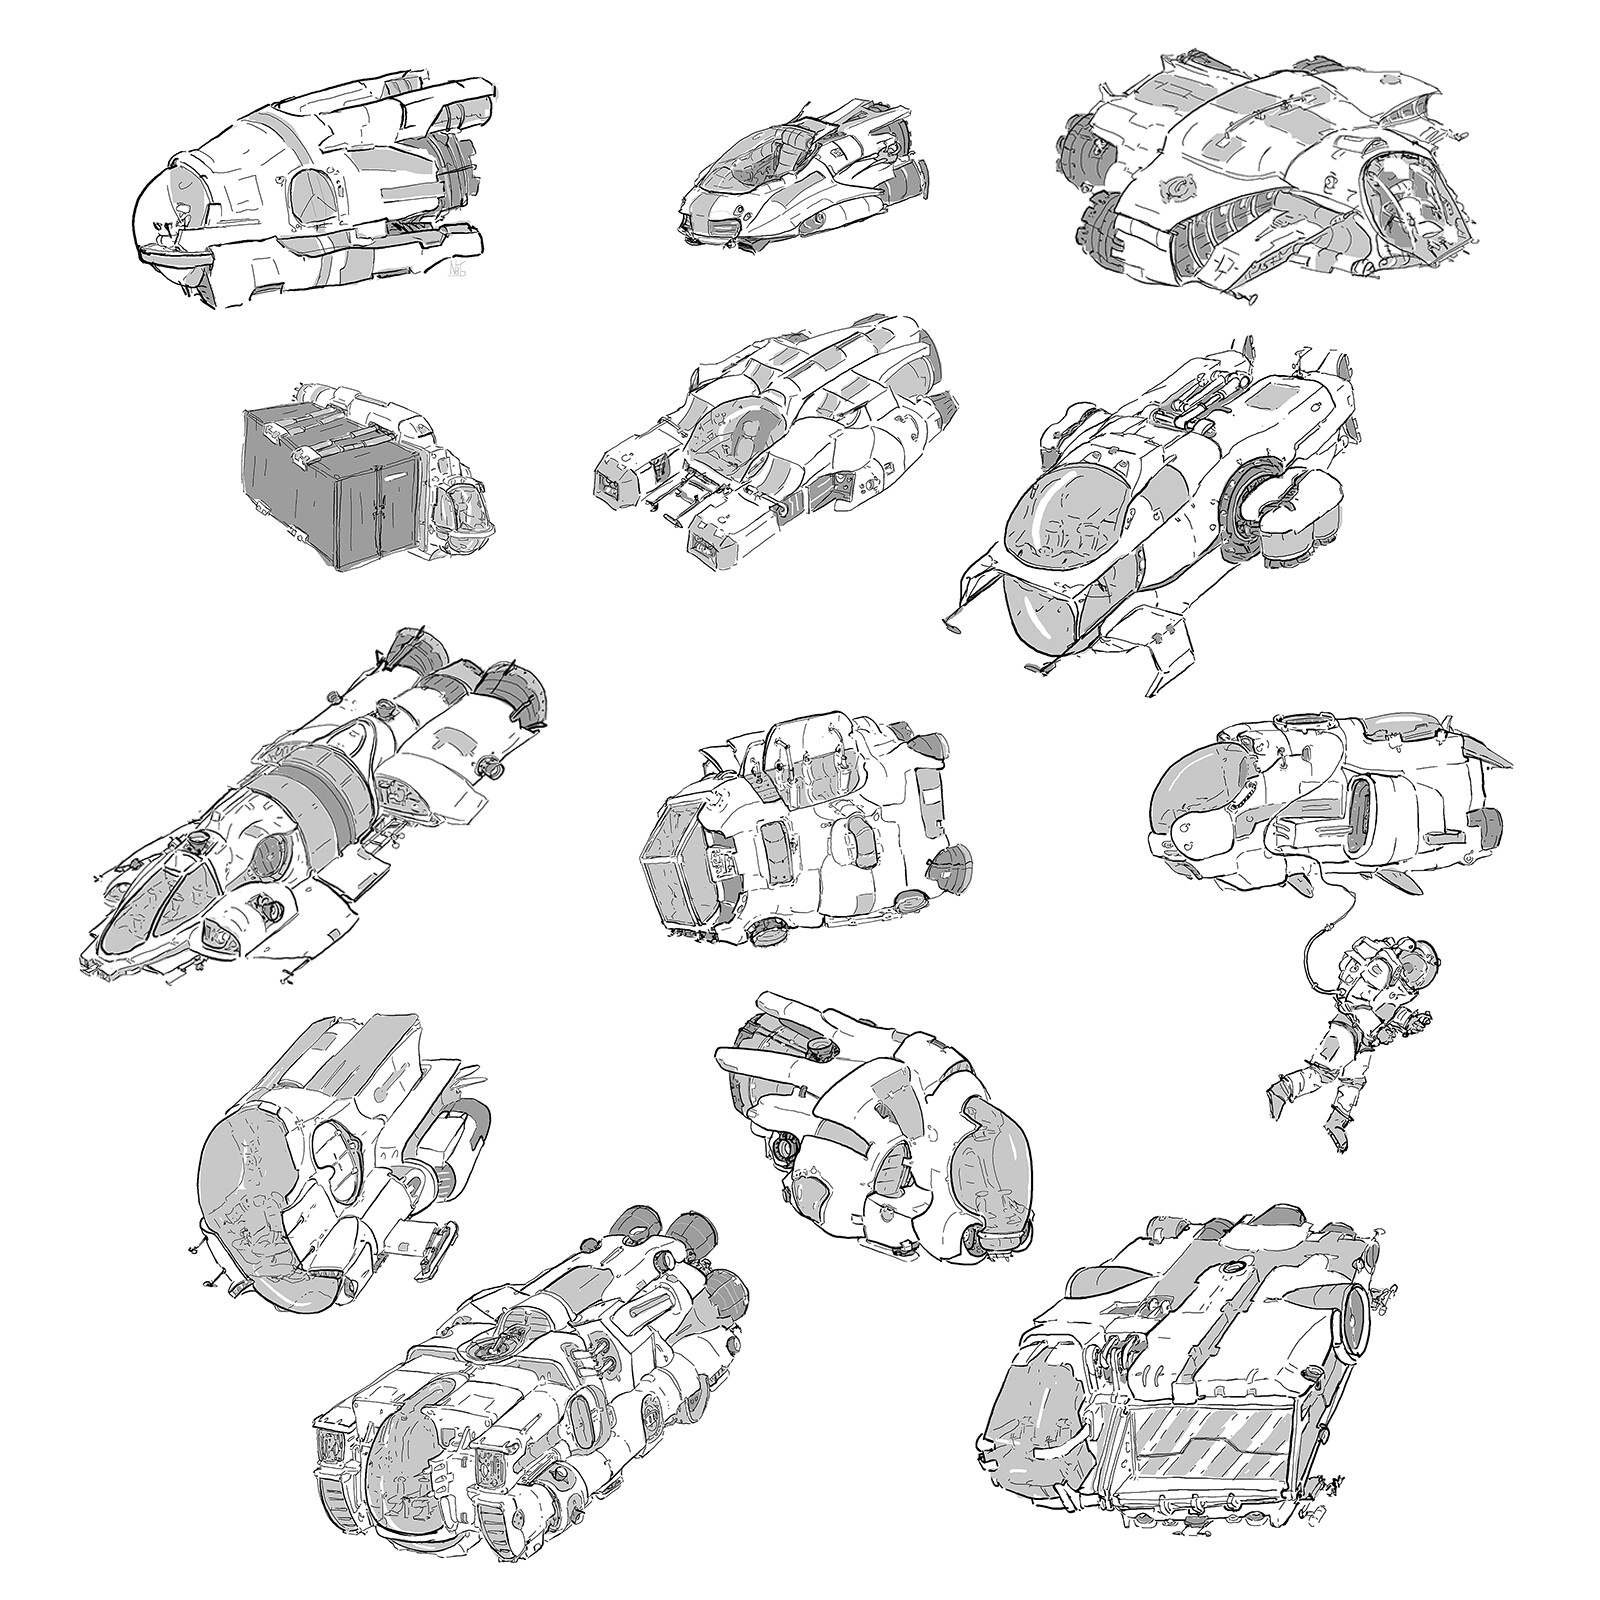 a bunch of spaceships